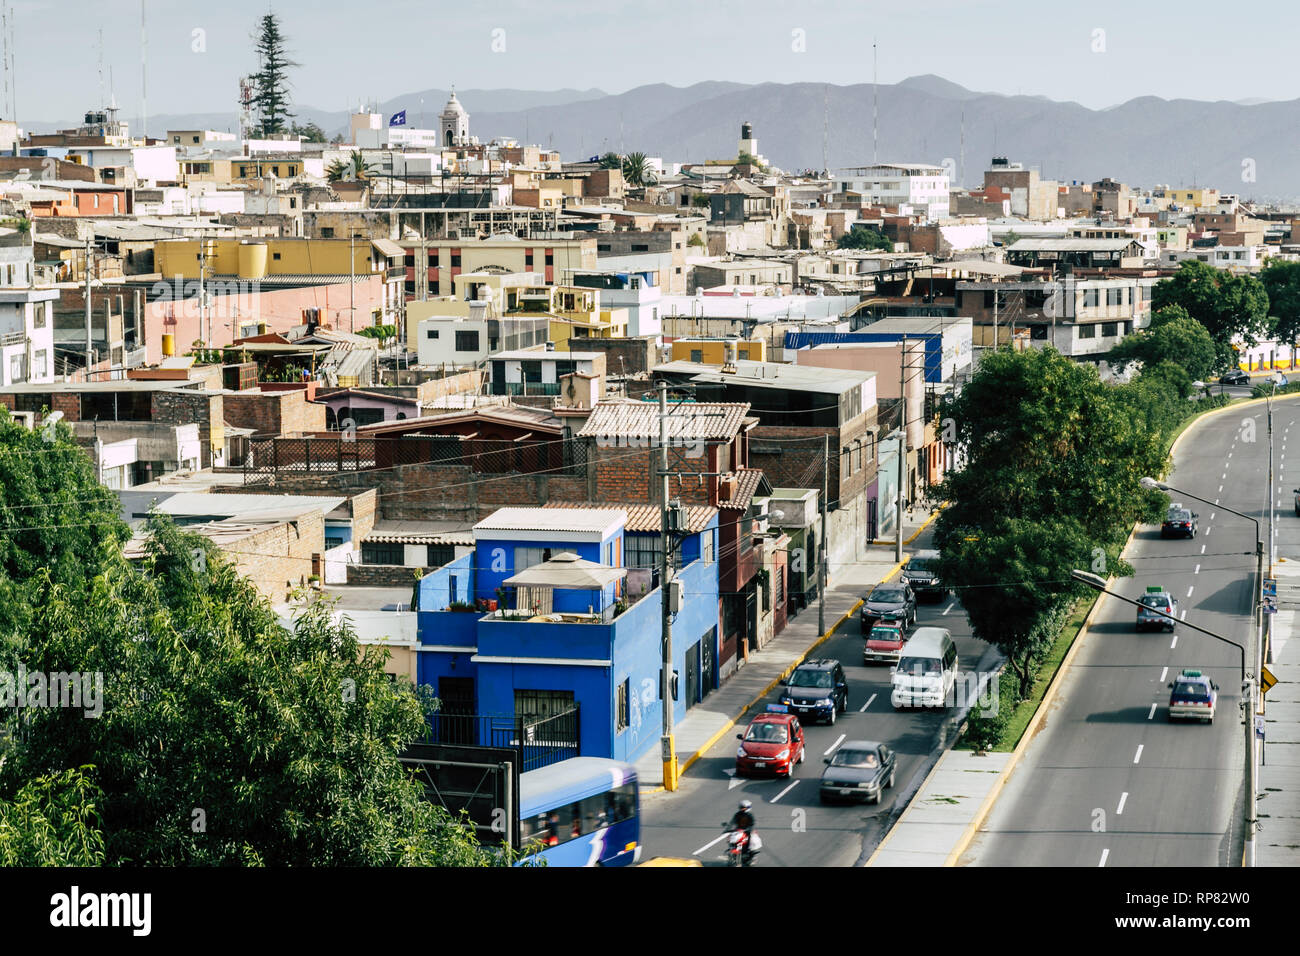 View of a neighbourhood with mountains in the background in Arequipa, Peru. Stock Photo